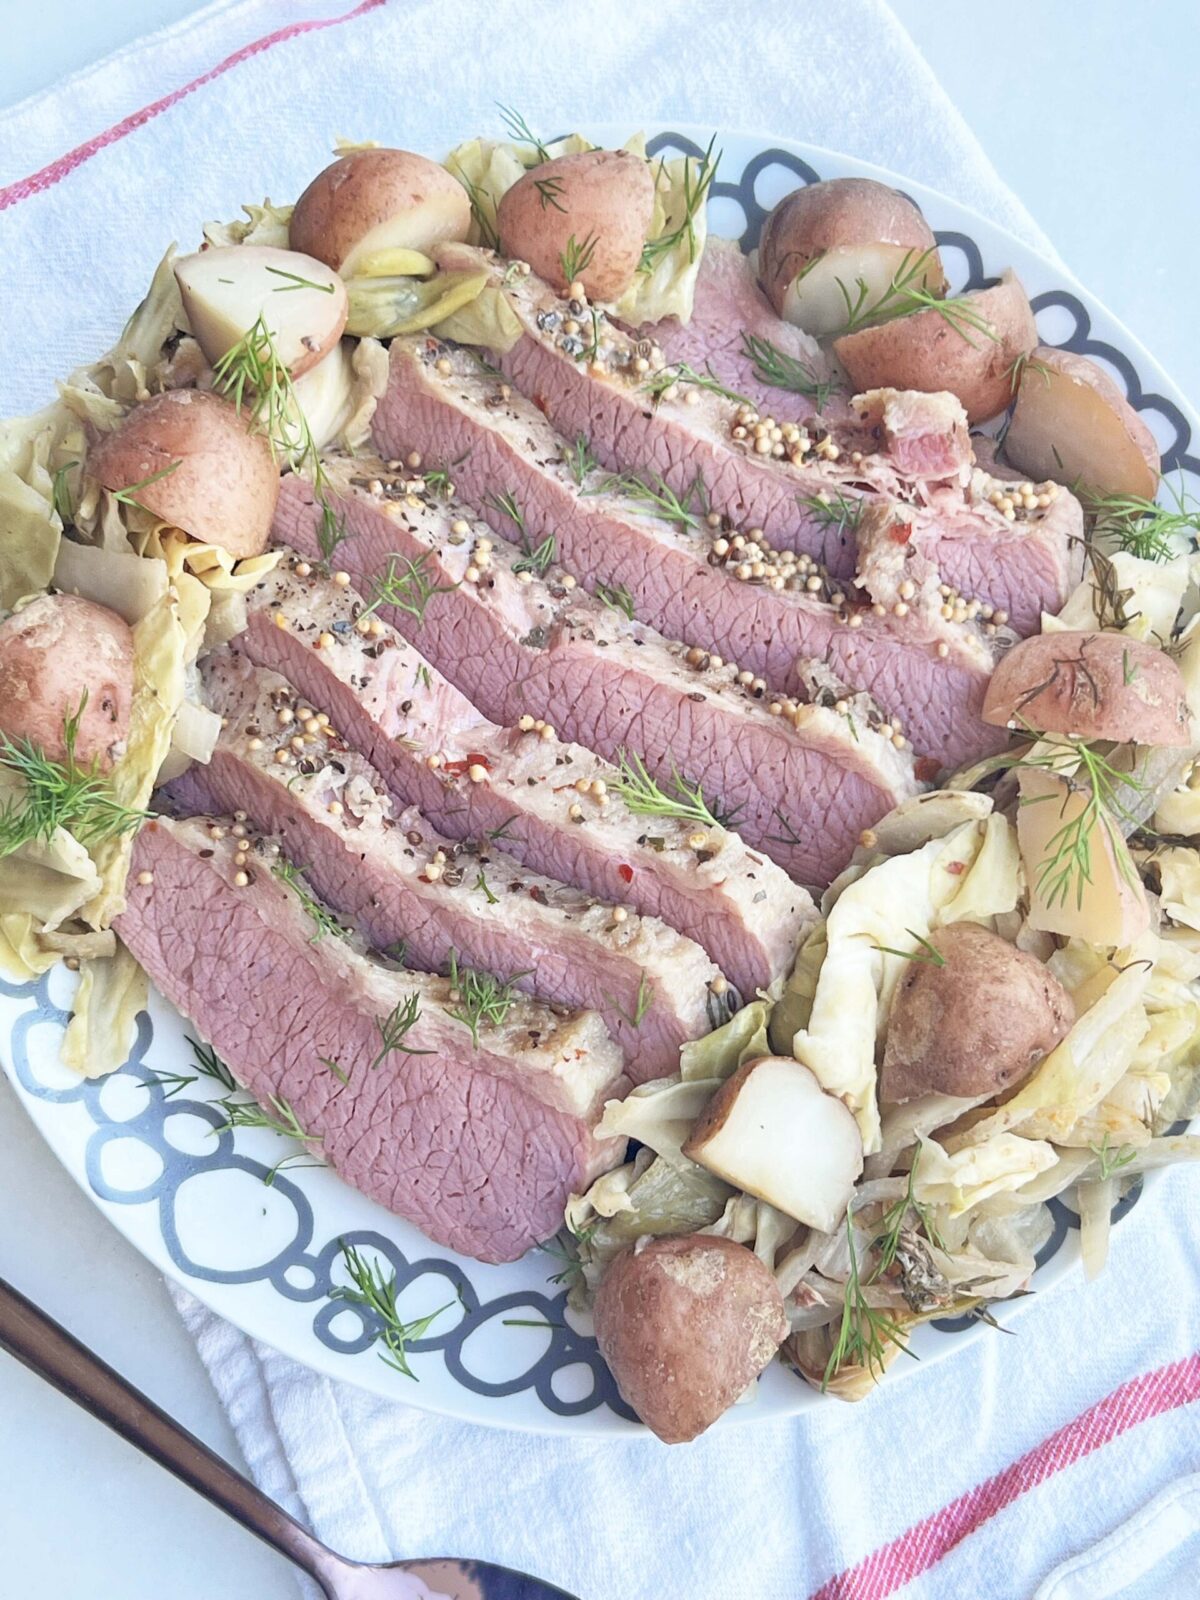 How to Make Corn Beef and Cabbage Recipe. This is an easy slow cooker recipe that is perfect for St. Patricks Day or an easy meal prep dinner for the week. Happy Cooking! www.ChopHappy.com #St.PatricksDayrecipe #cornbeefandcabbage